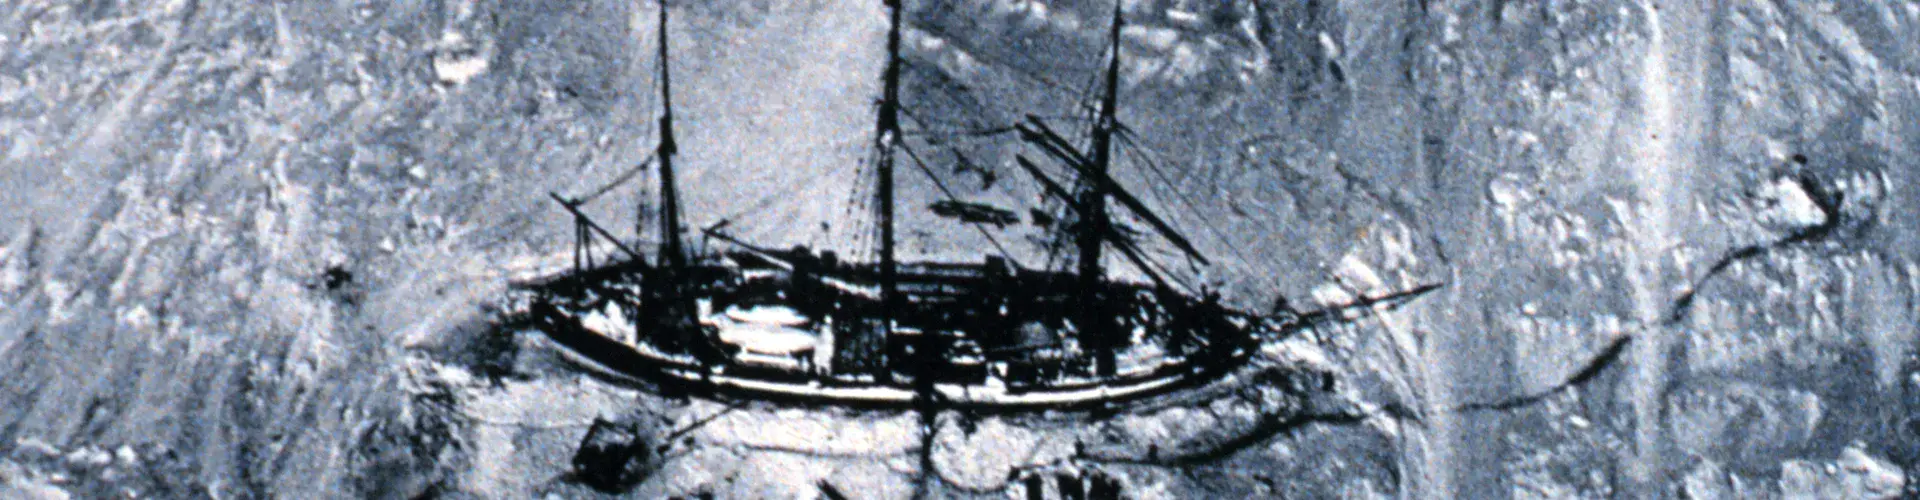 Aerial view of the Gauss (Erich von Drygalski's ship) in the ice during the 1901 German Antarctic Expedition (Credit: National Oceanic and Atmospheric Administration/Department of Commerce)